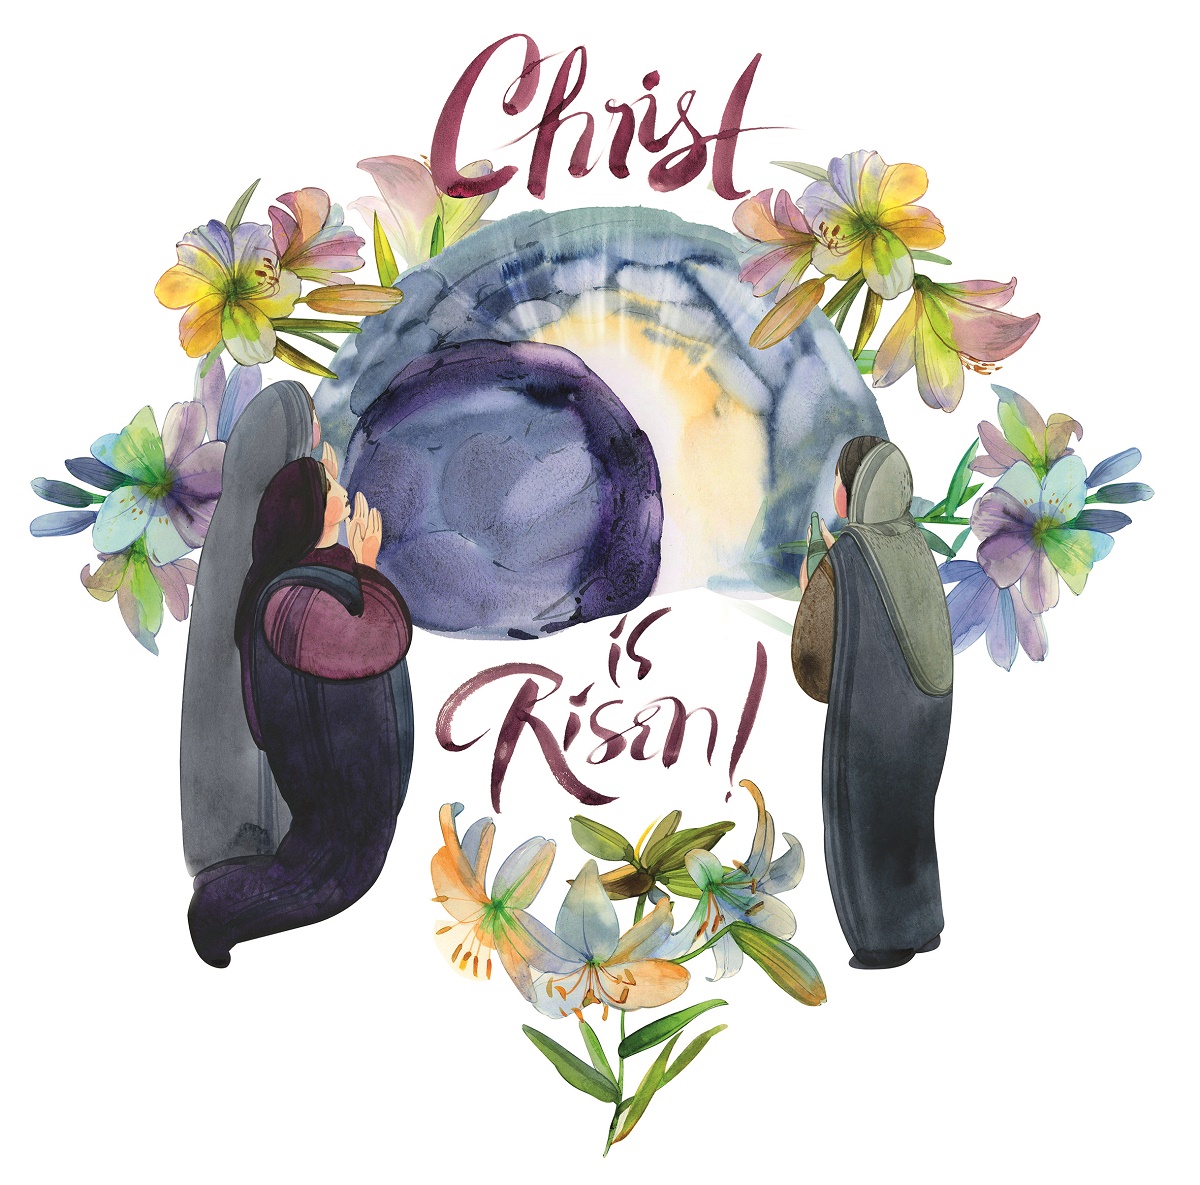 Easter watercolor illustration: the cave of jesus christ, the myrrh bearing wife, a wreath of lilies, the inscription "christ is risen!" easter print, decor, christian resurrection, holy sepulchre